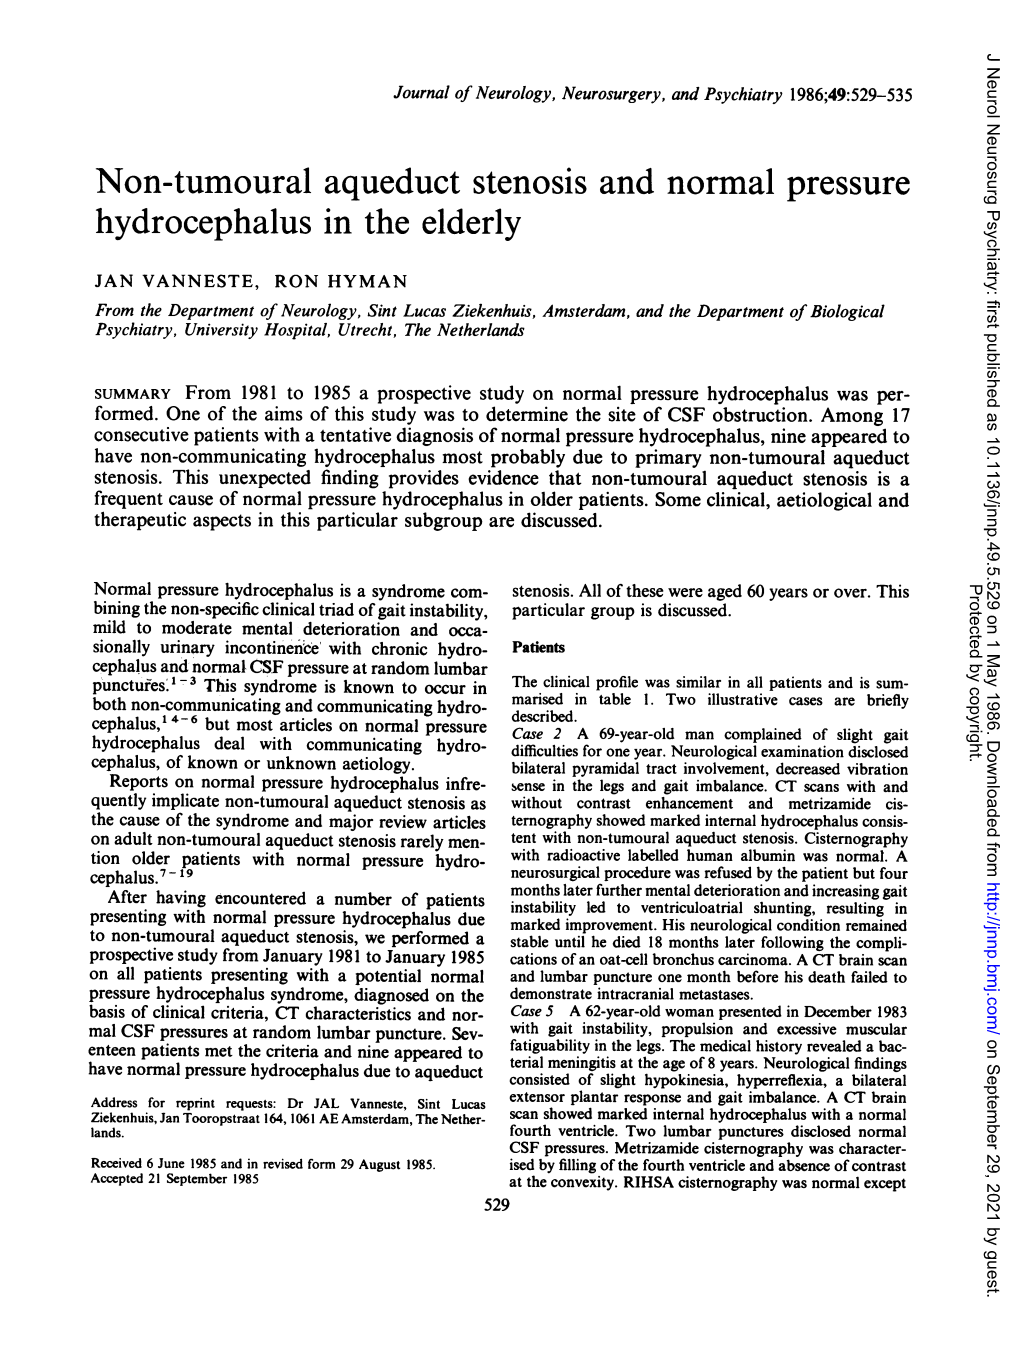 Non-Tumoural Aqueduct Stenosis and Normal Pressure Hydrocephalus in the Elderly